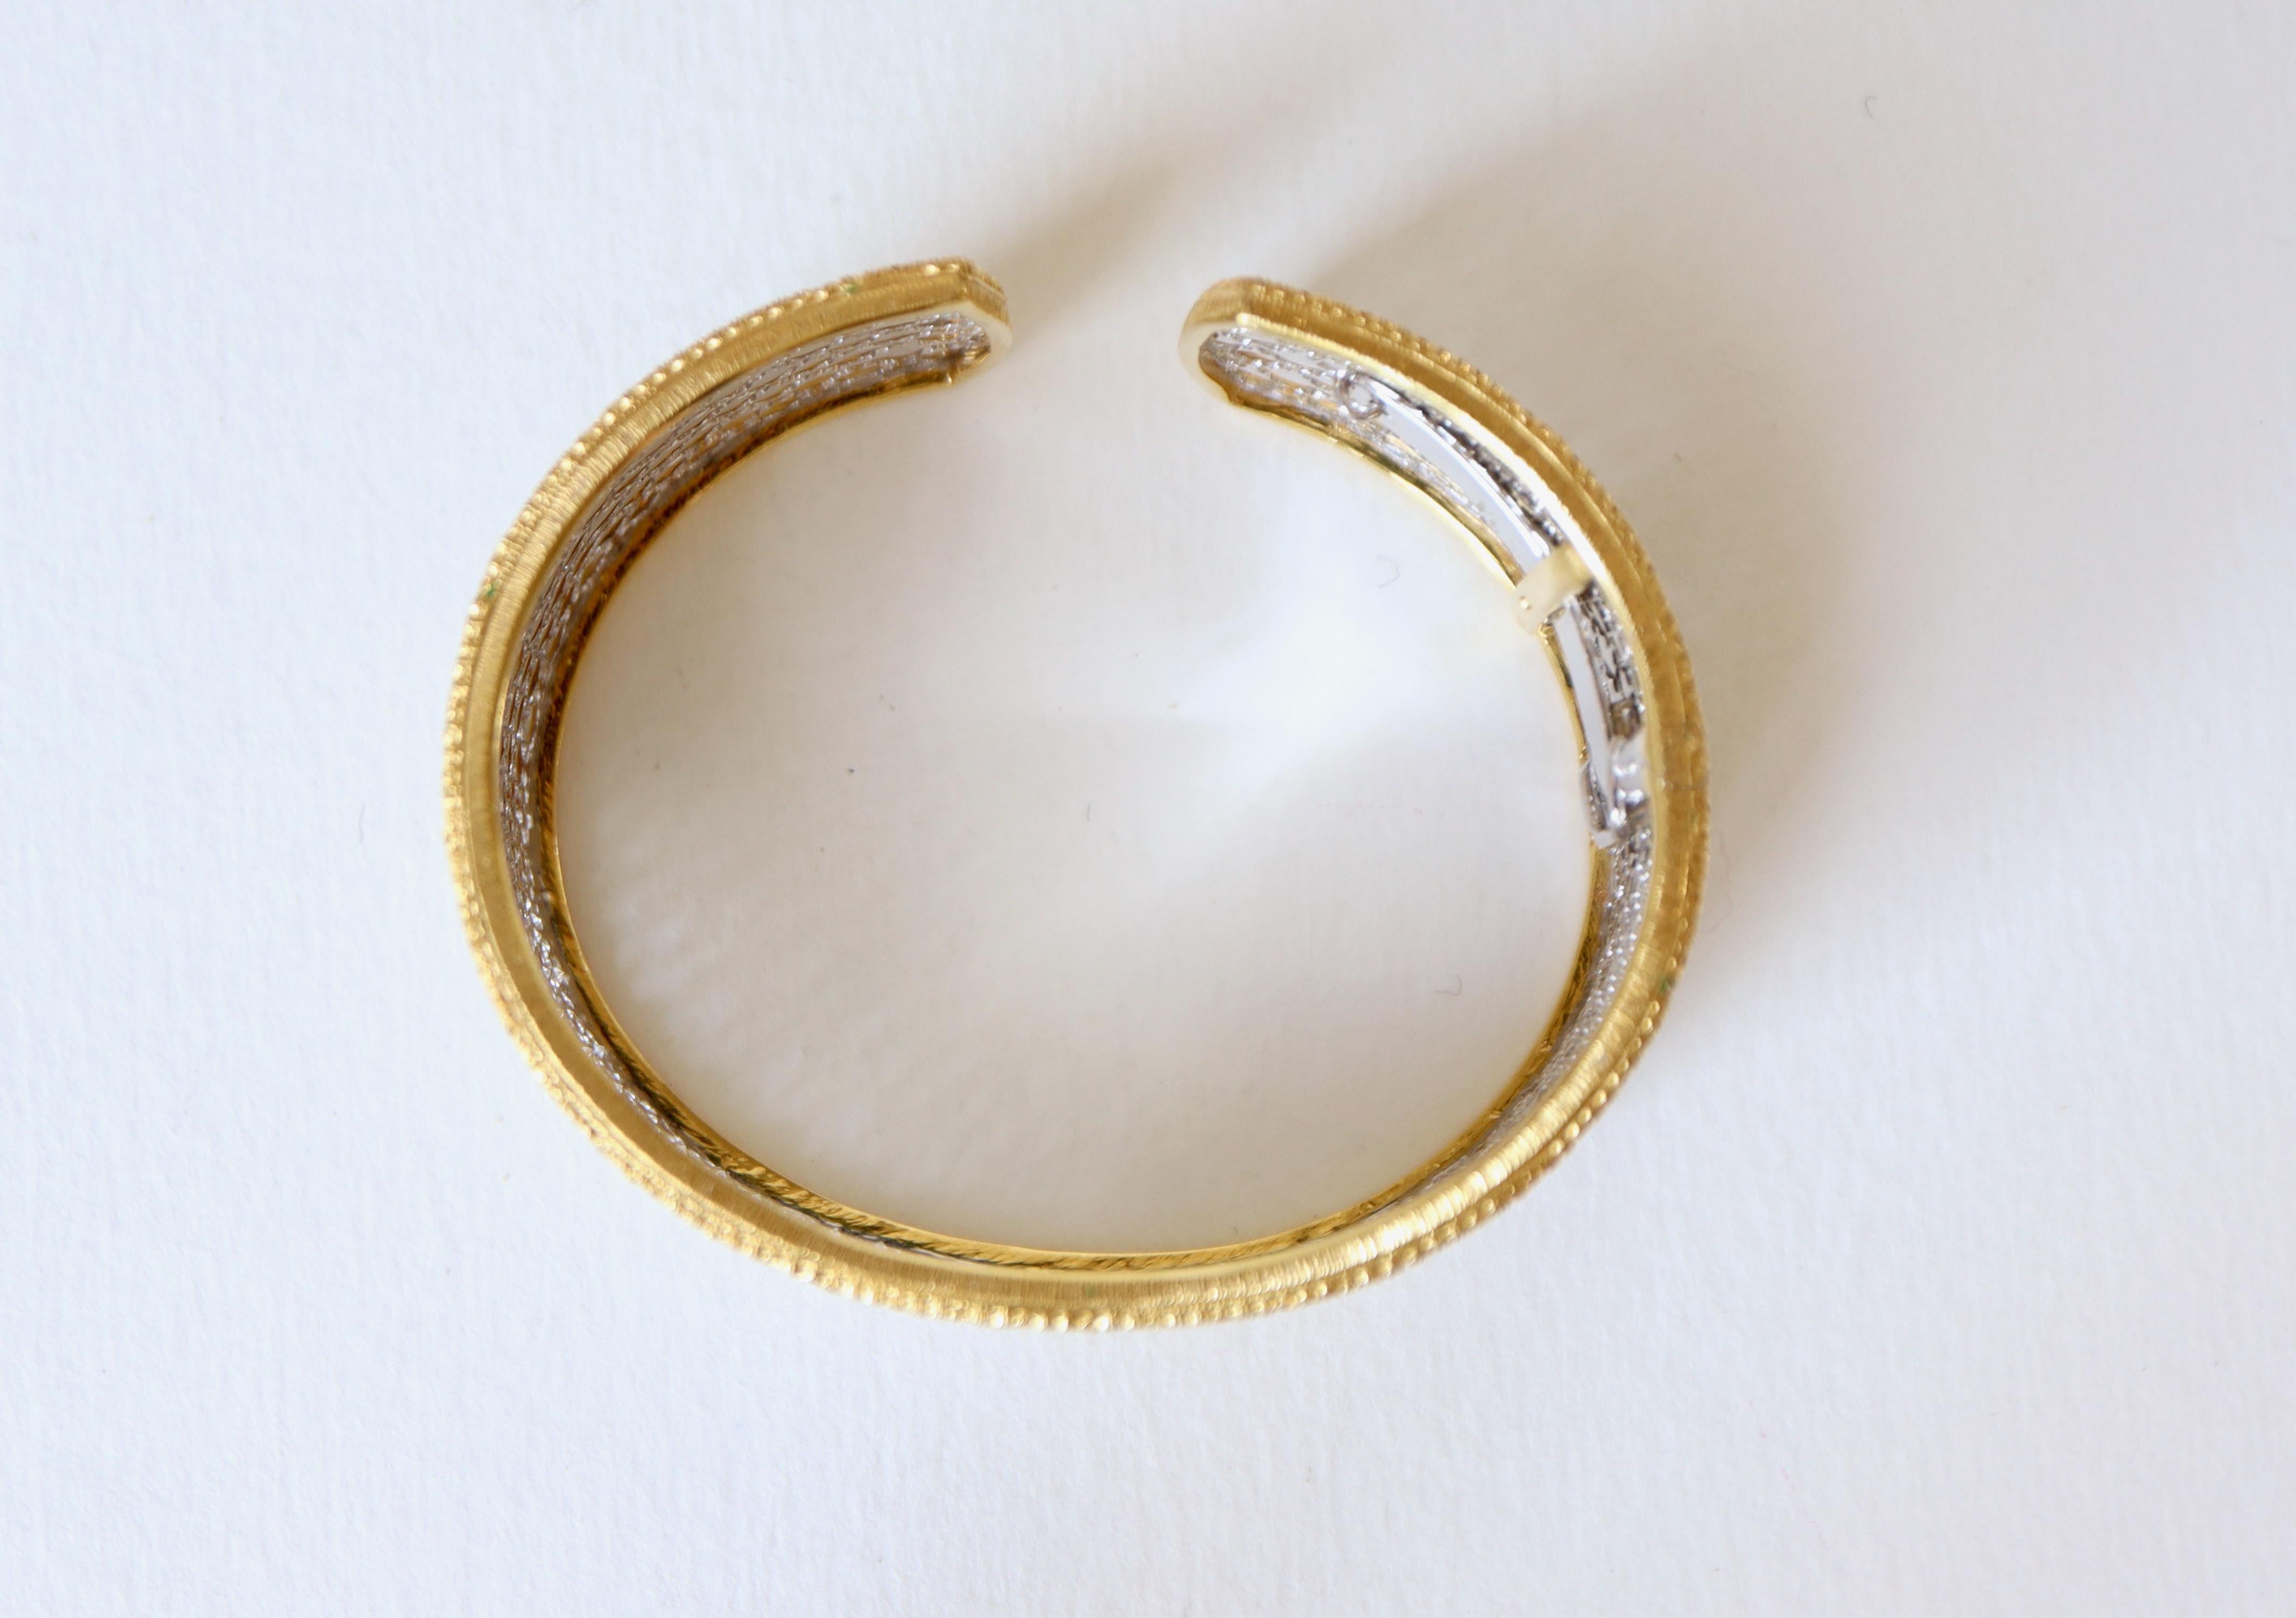 Women's or Men's Bracelet Bangle Yellow Withe Gold 18k 3.51 Carats of Diamonds For Sale